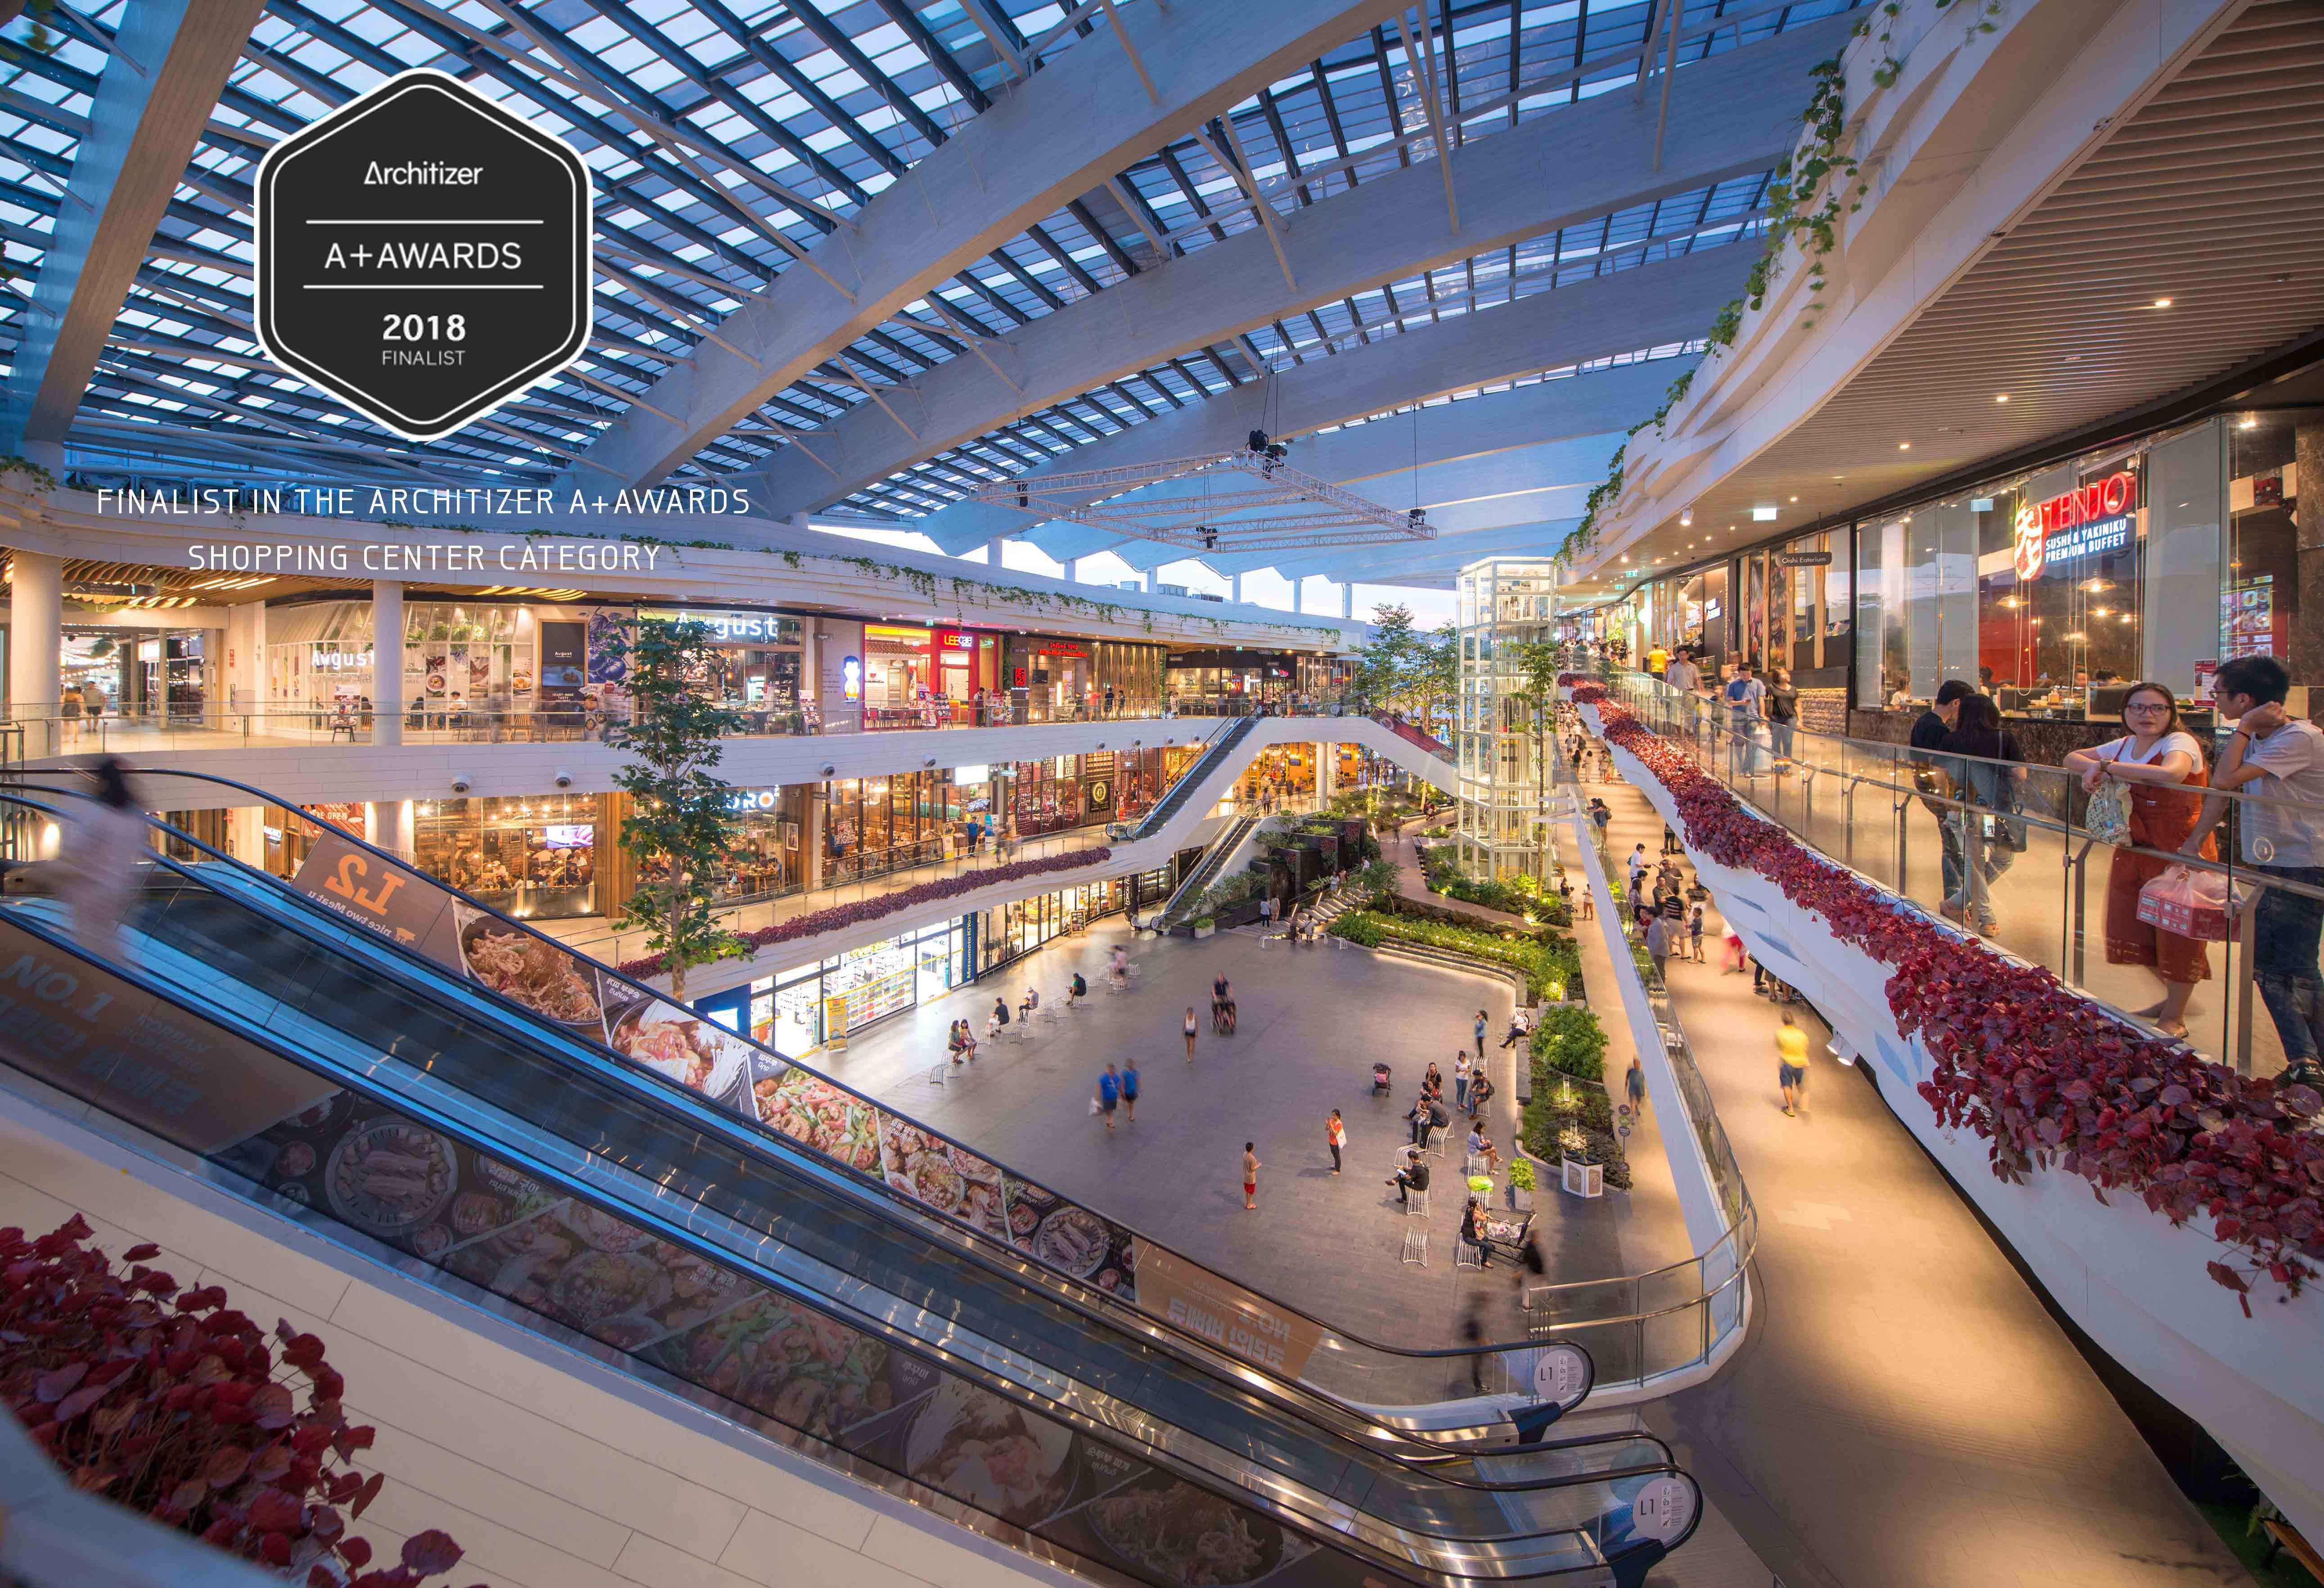 MEGA FOODWALK is a Finalist in the Architizer A+Awards for the Shopping Center category